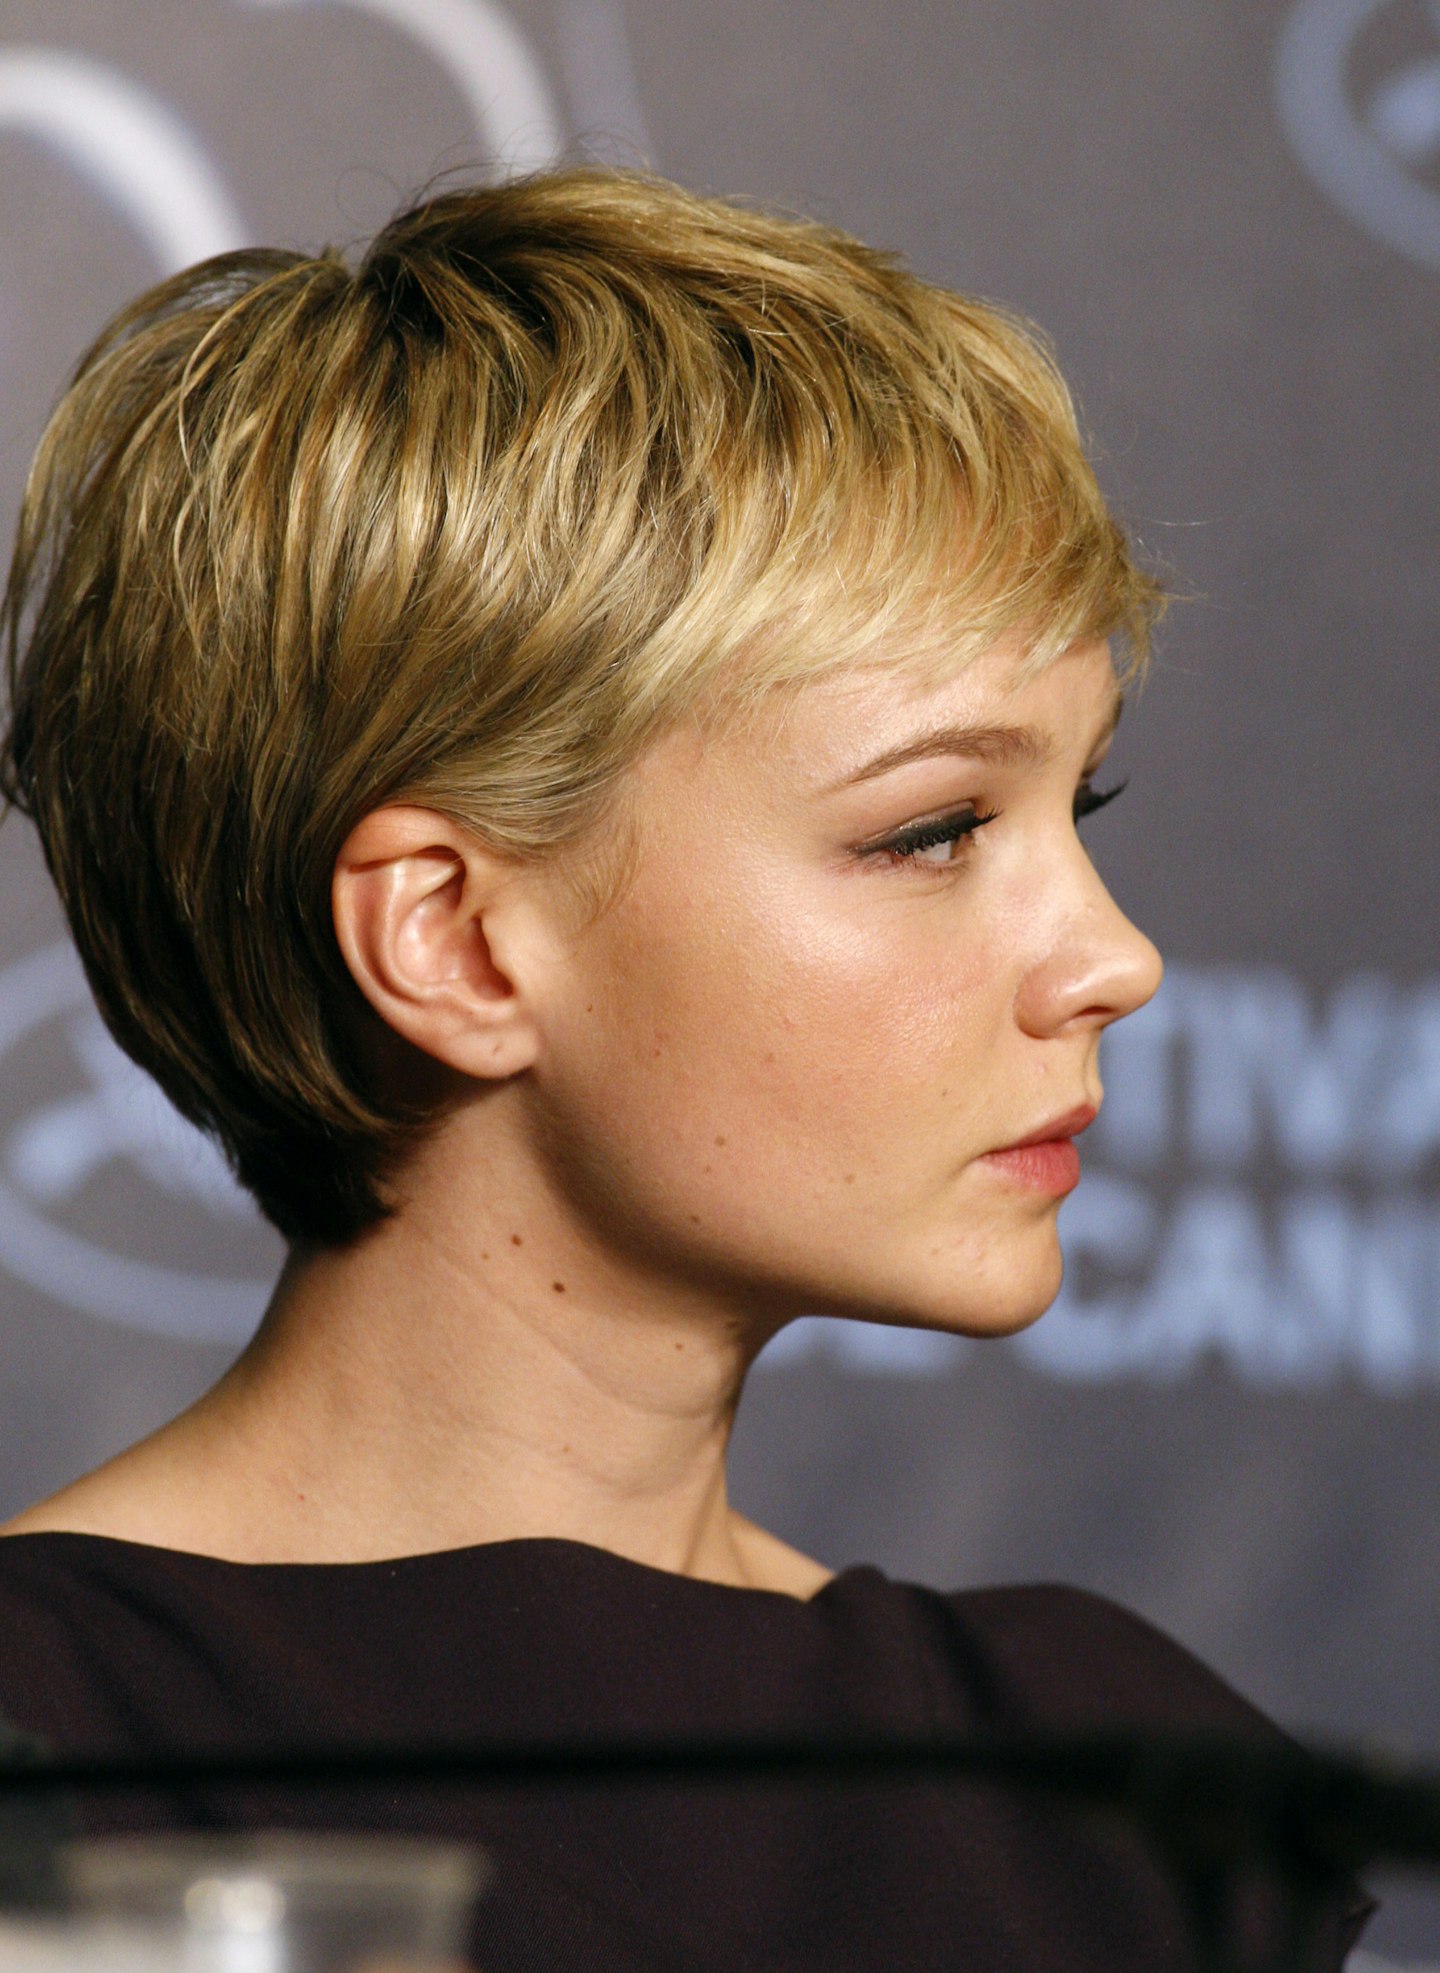 Best Short Haircuts for Thick Hair Women 2013